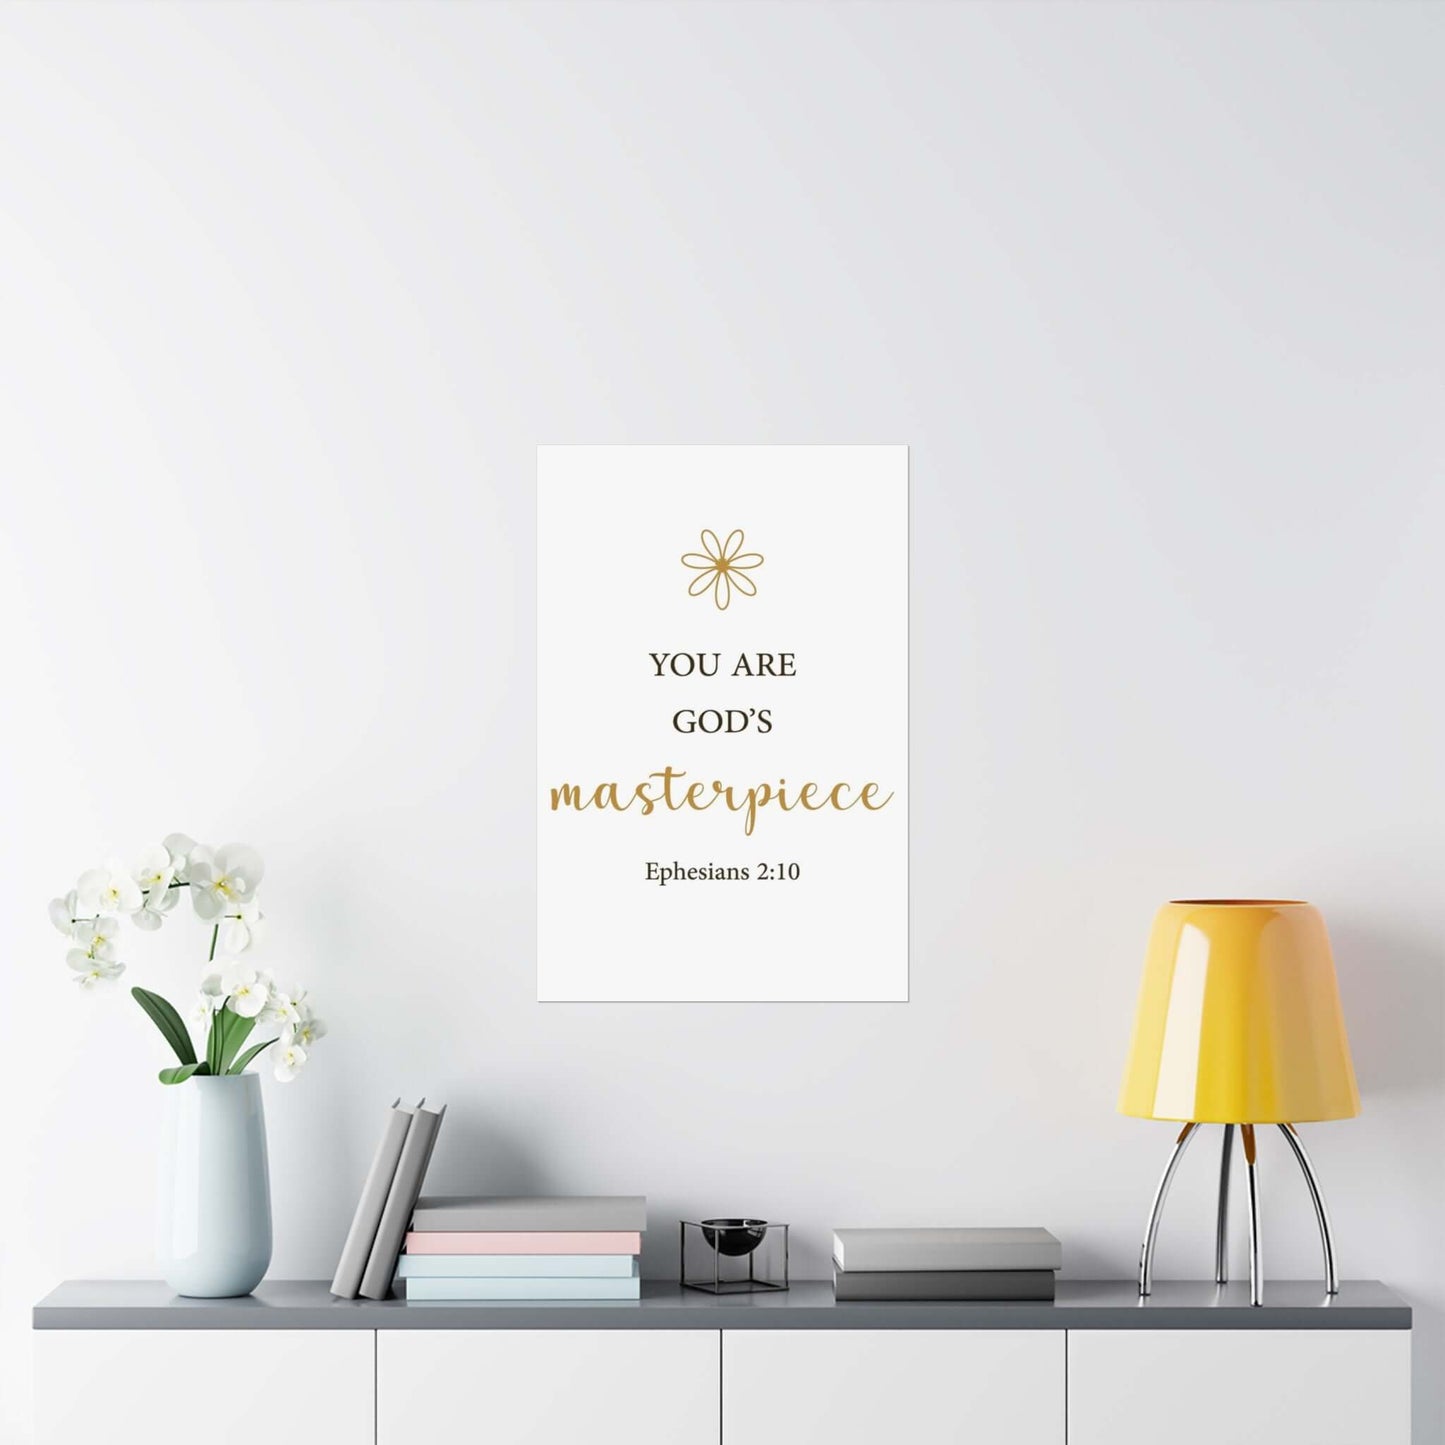 Luxury Wall Art Poster - Premium Matte Vertical with Ephesians 2:10 | Assembled in the USA,Assembled in USA,Back to School,Home & Living,Indoor,Made in the USA,Made in USA,Matte,Paper,Posters,Valentine's Day promotion